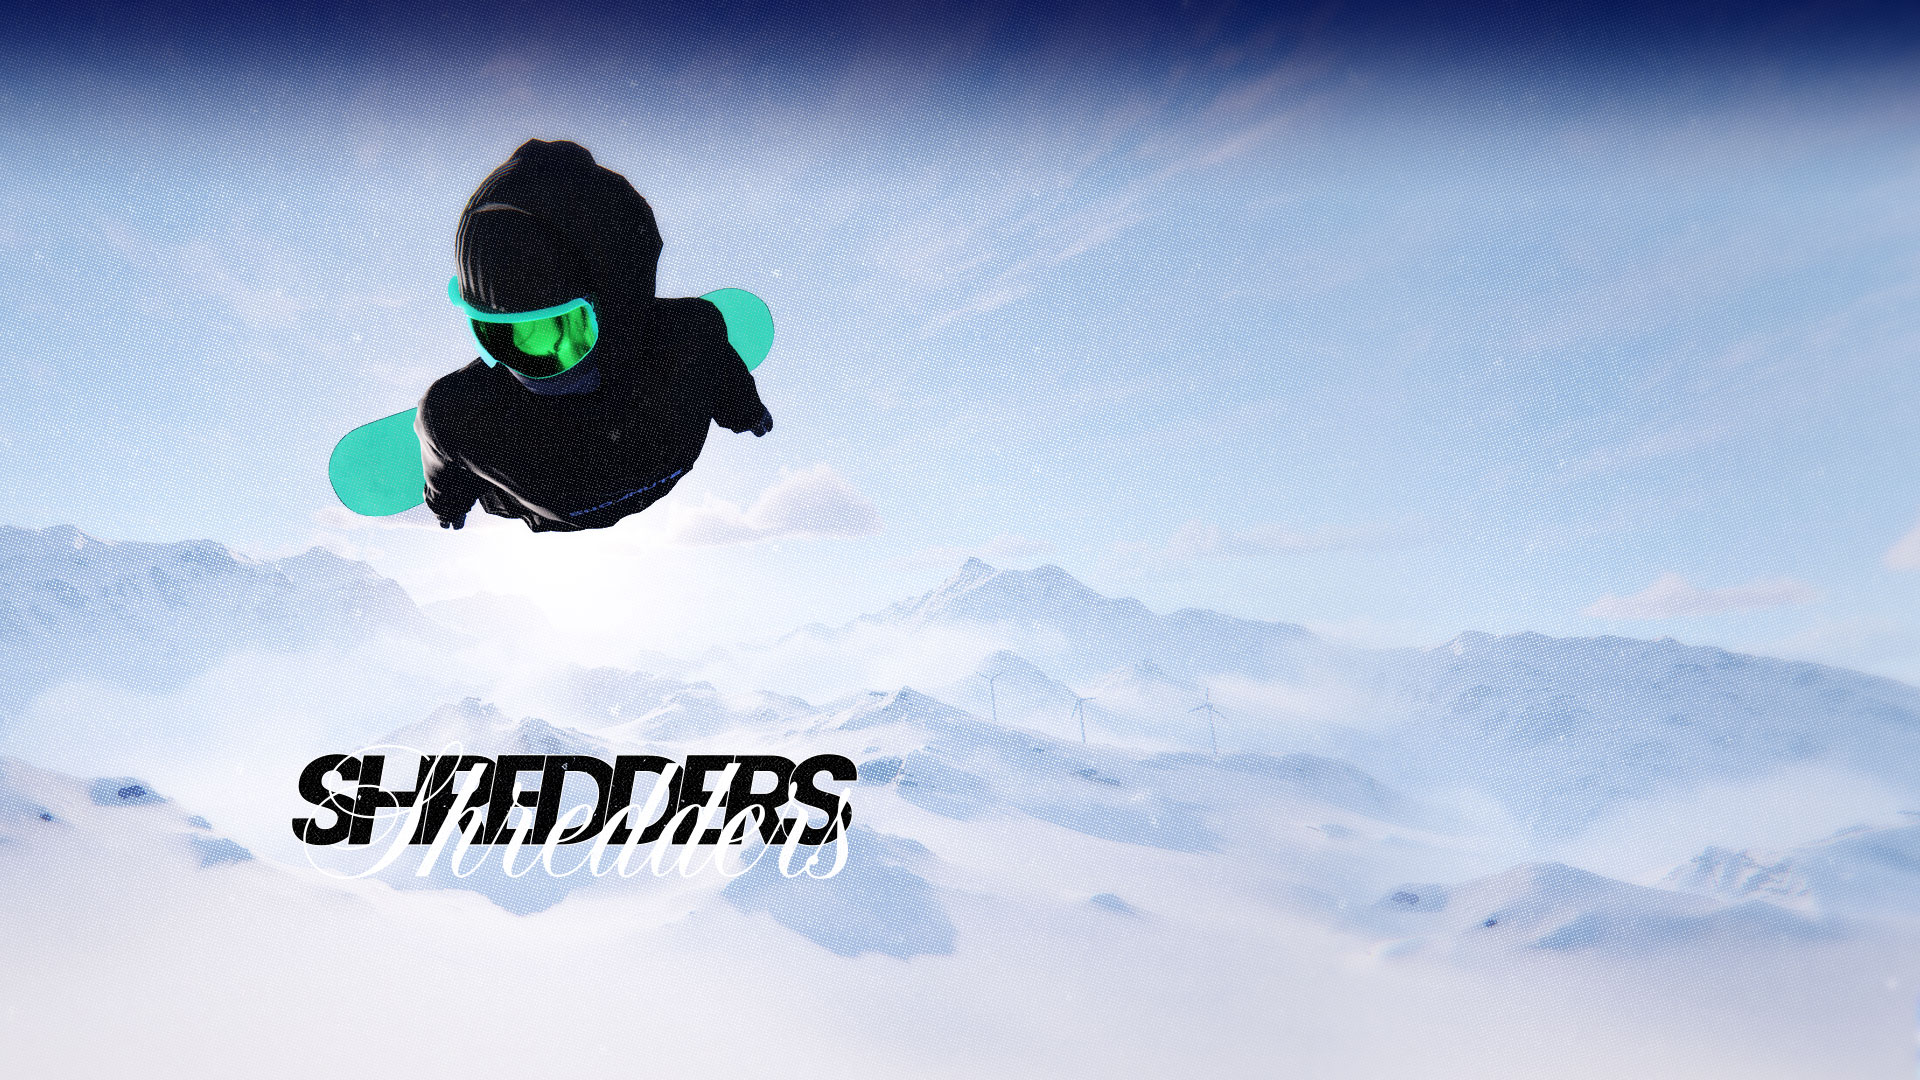 A snowboarder with their hands at their sides flies through the air with mountains in the background.